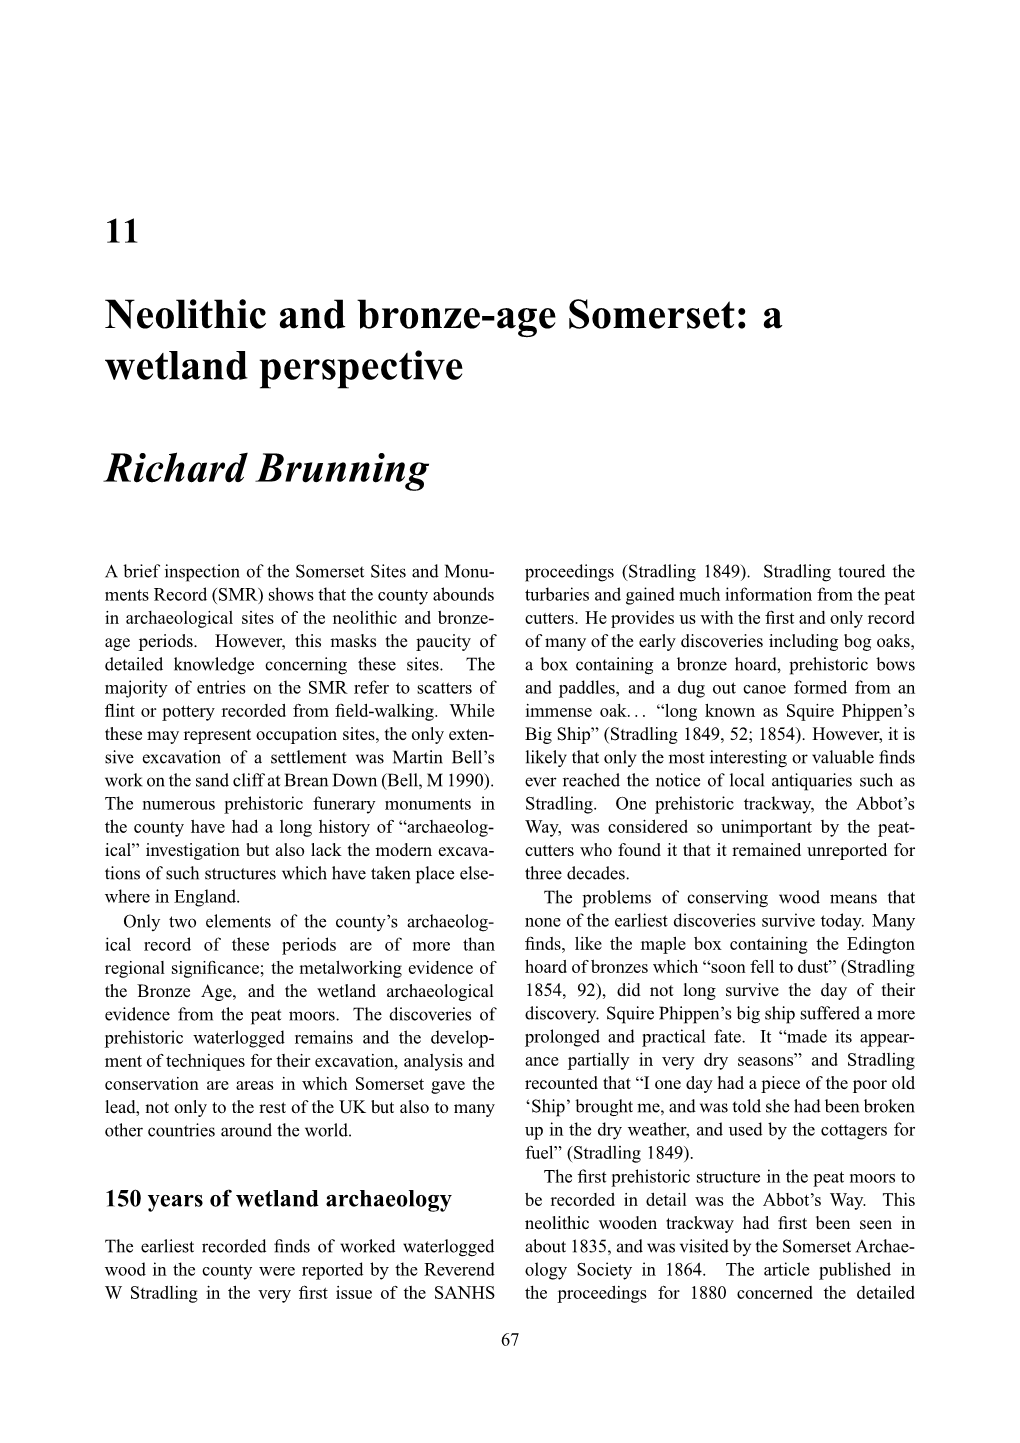 Neolithic and Bronze-Age Somerset: a Wetland Perspective